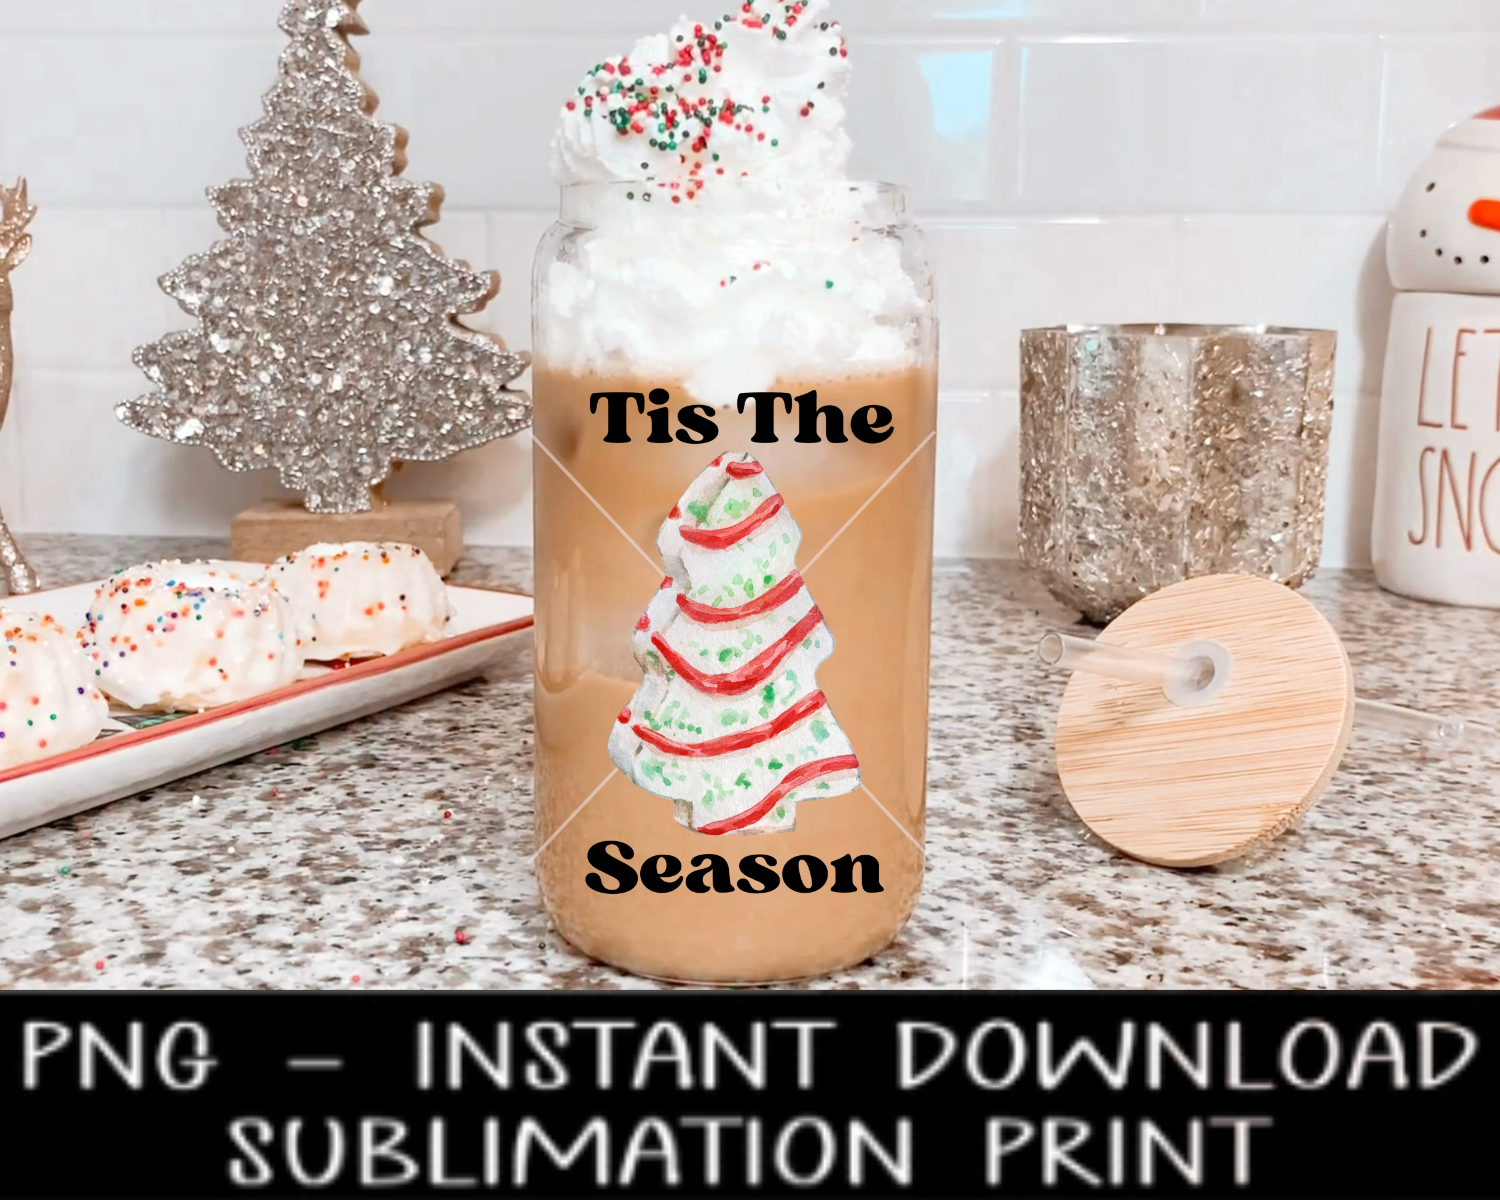 Christmas PNG, Tis The Season UV DtF File, Christmas Iced Coffee Glass PNG Digital Design, Sublimation PnG, Instant Download Water Slide PnG